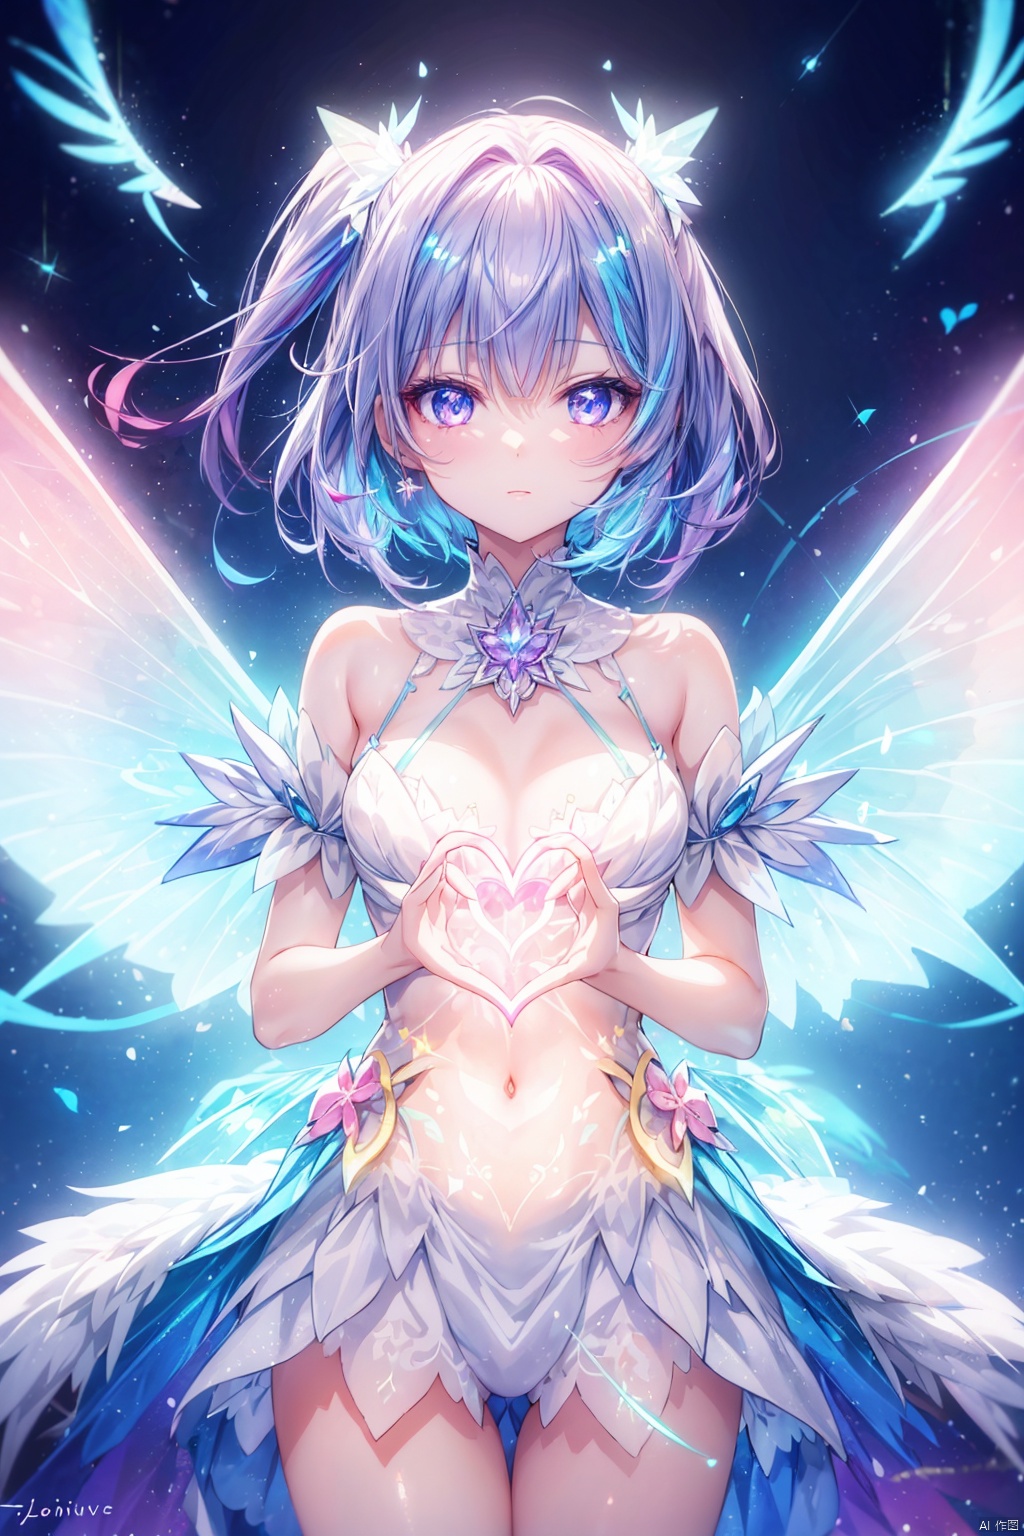 1 Girl, lovely heart,luminous fairy,glowing body,colorful glowing wings,glowing clothes,luminous fairy,glowing body,colorful glowing wings,glowing clothes,Rebellious girl, Good image quality, light color lines, anime style girl,